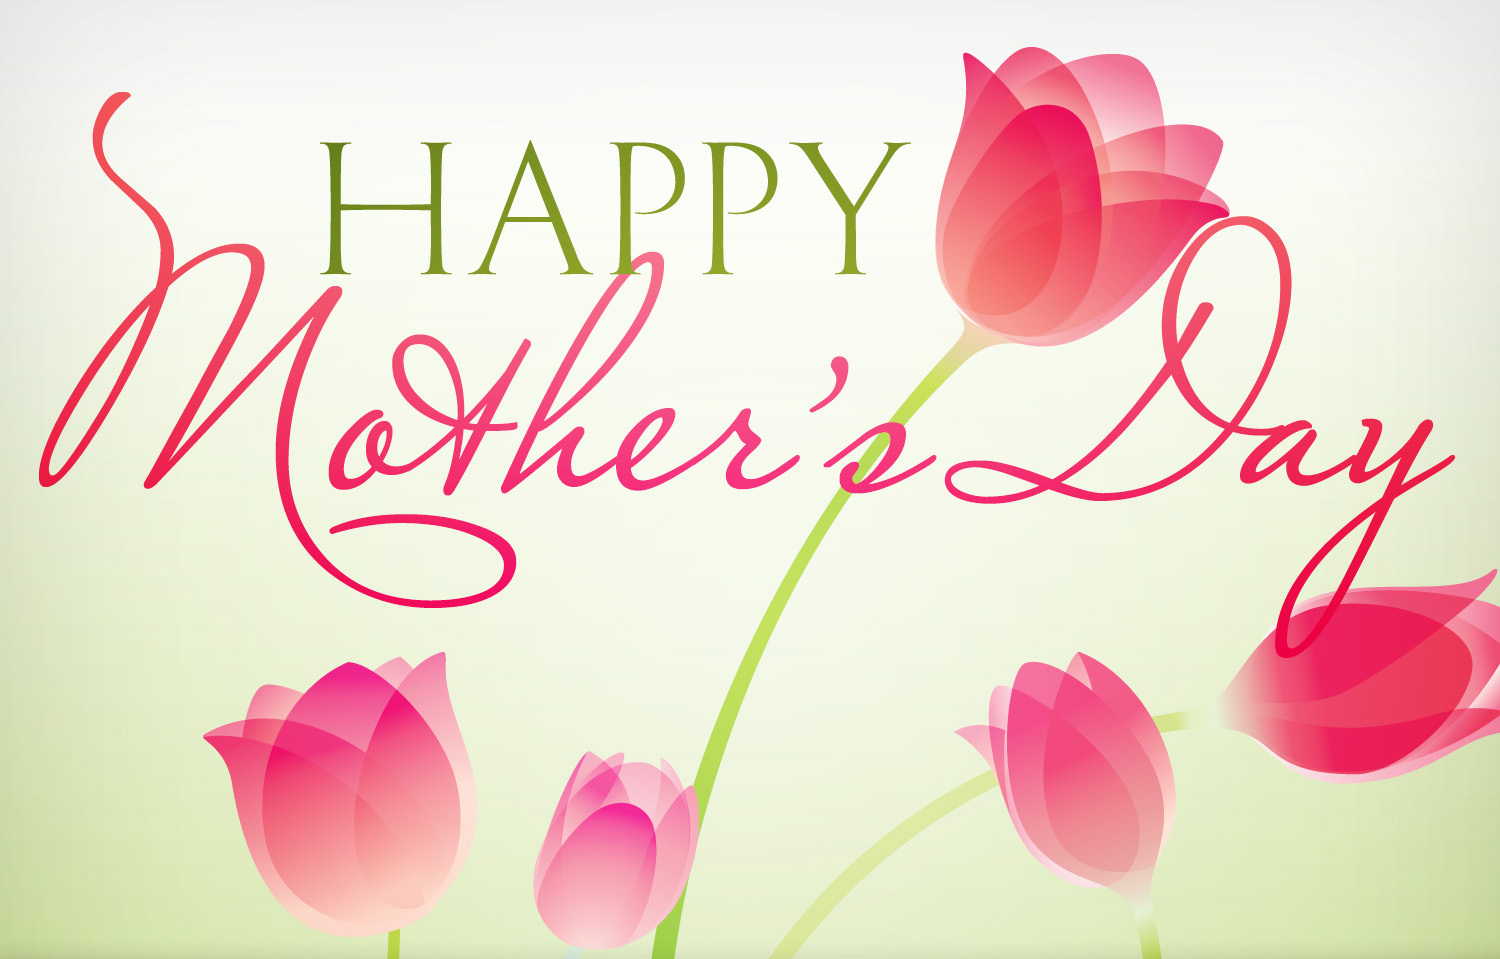 Happy Mothers Day Wallpaper On Rediff